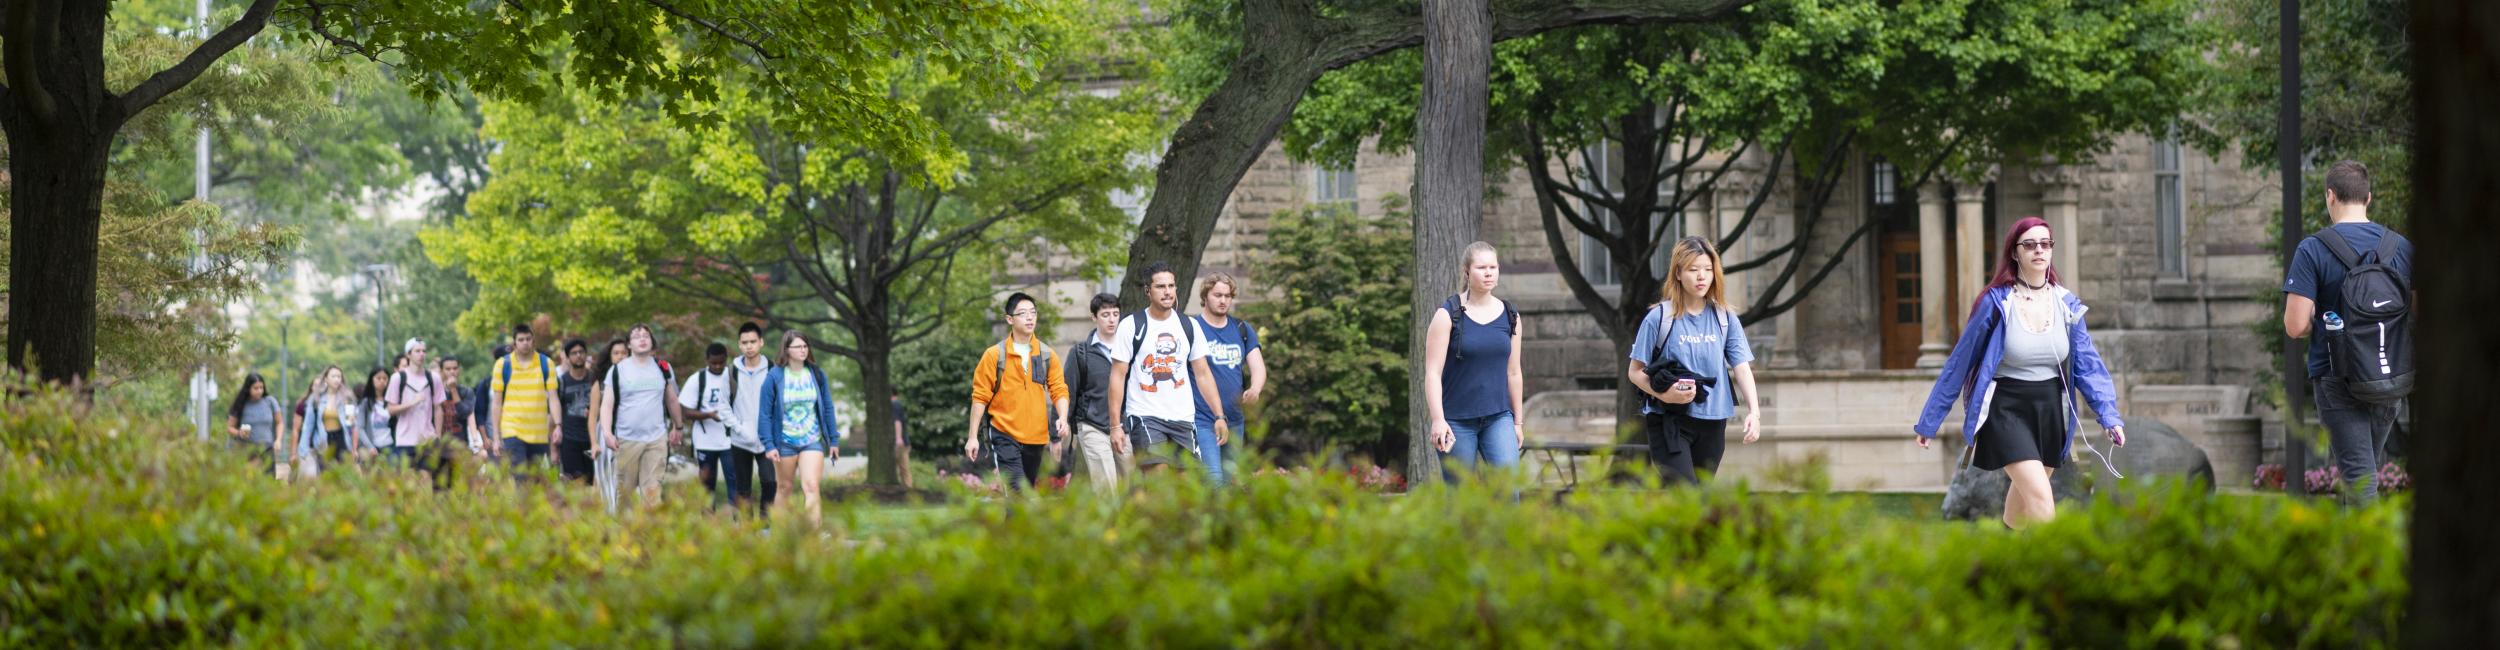 students walking across campus at Case Western Reserve Univeristy